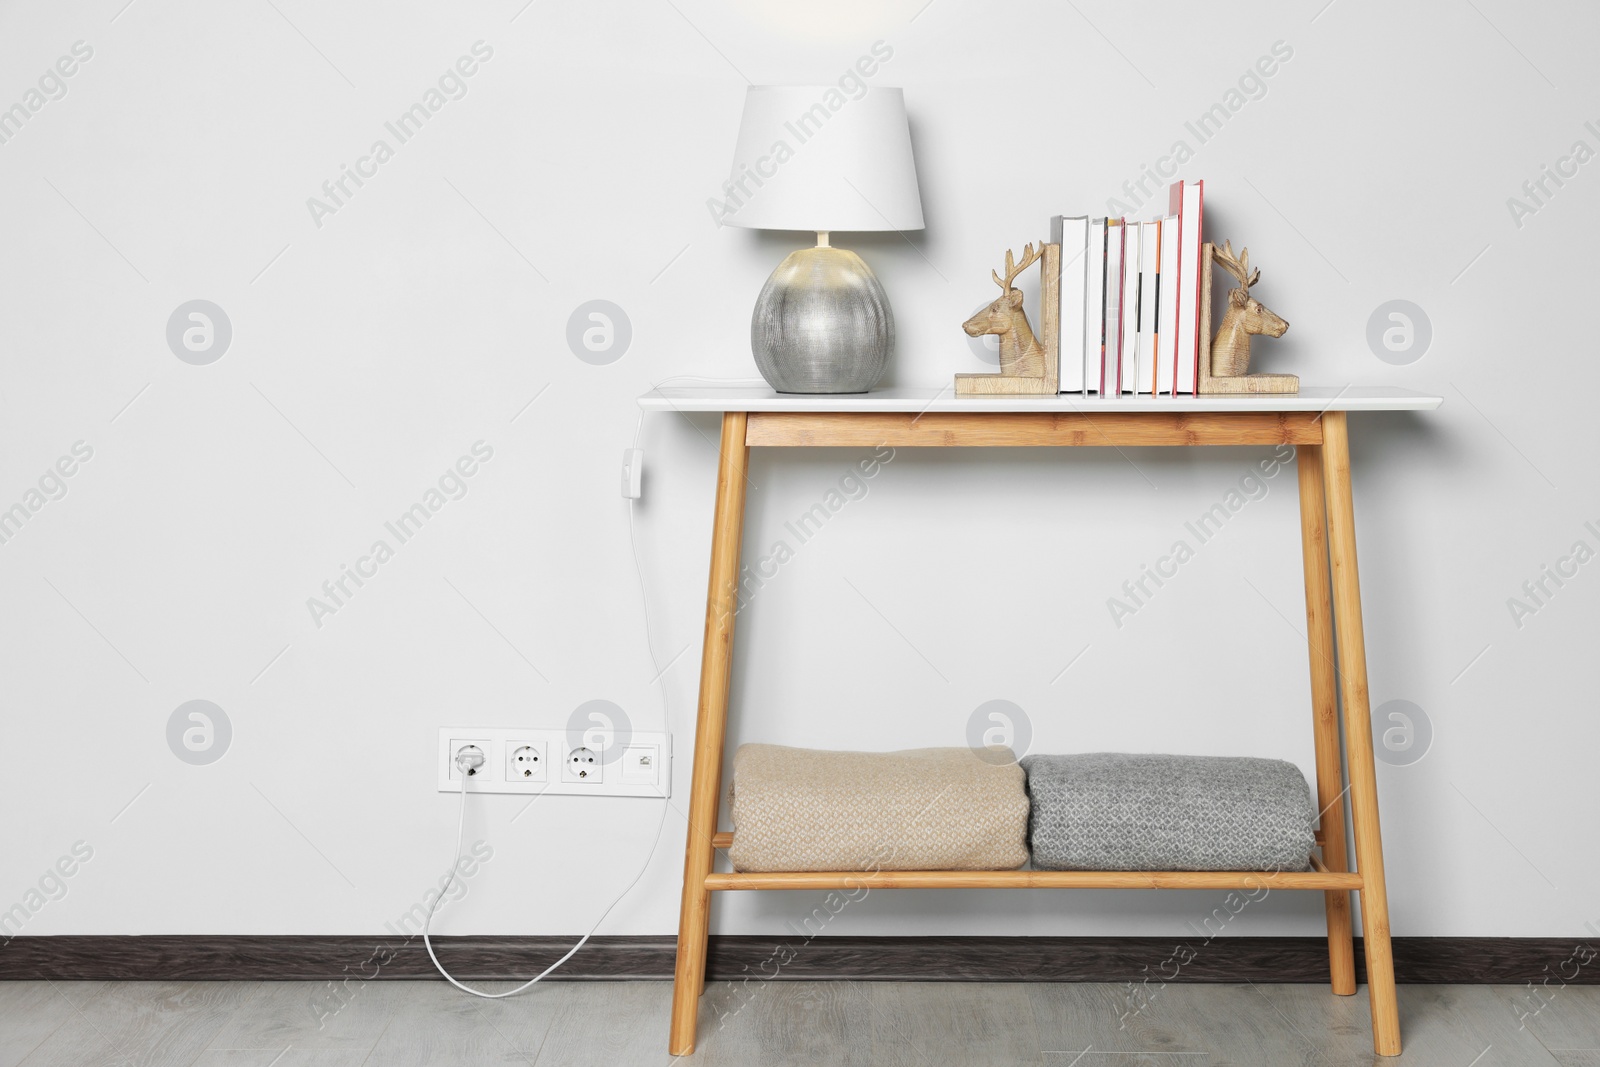 Photo of Lamp with books on wooden table near white wall, space for text